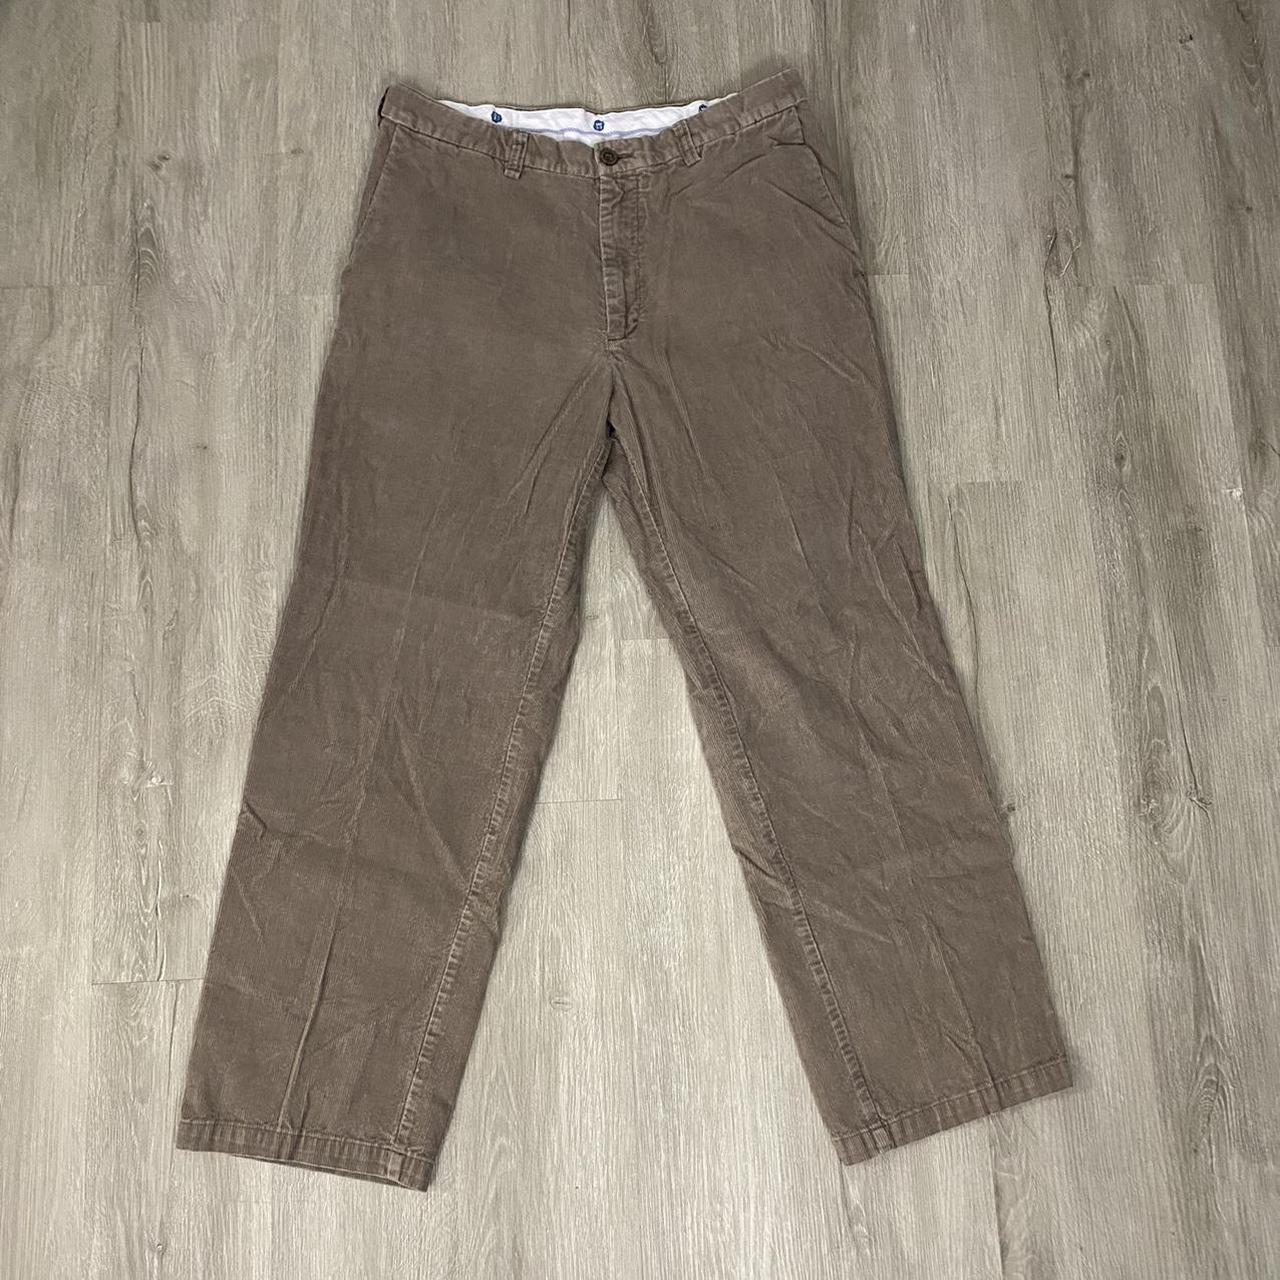 Product Image 2 - Vintage corduroy pants 34x29
In great